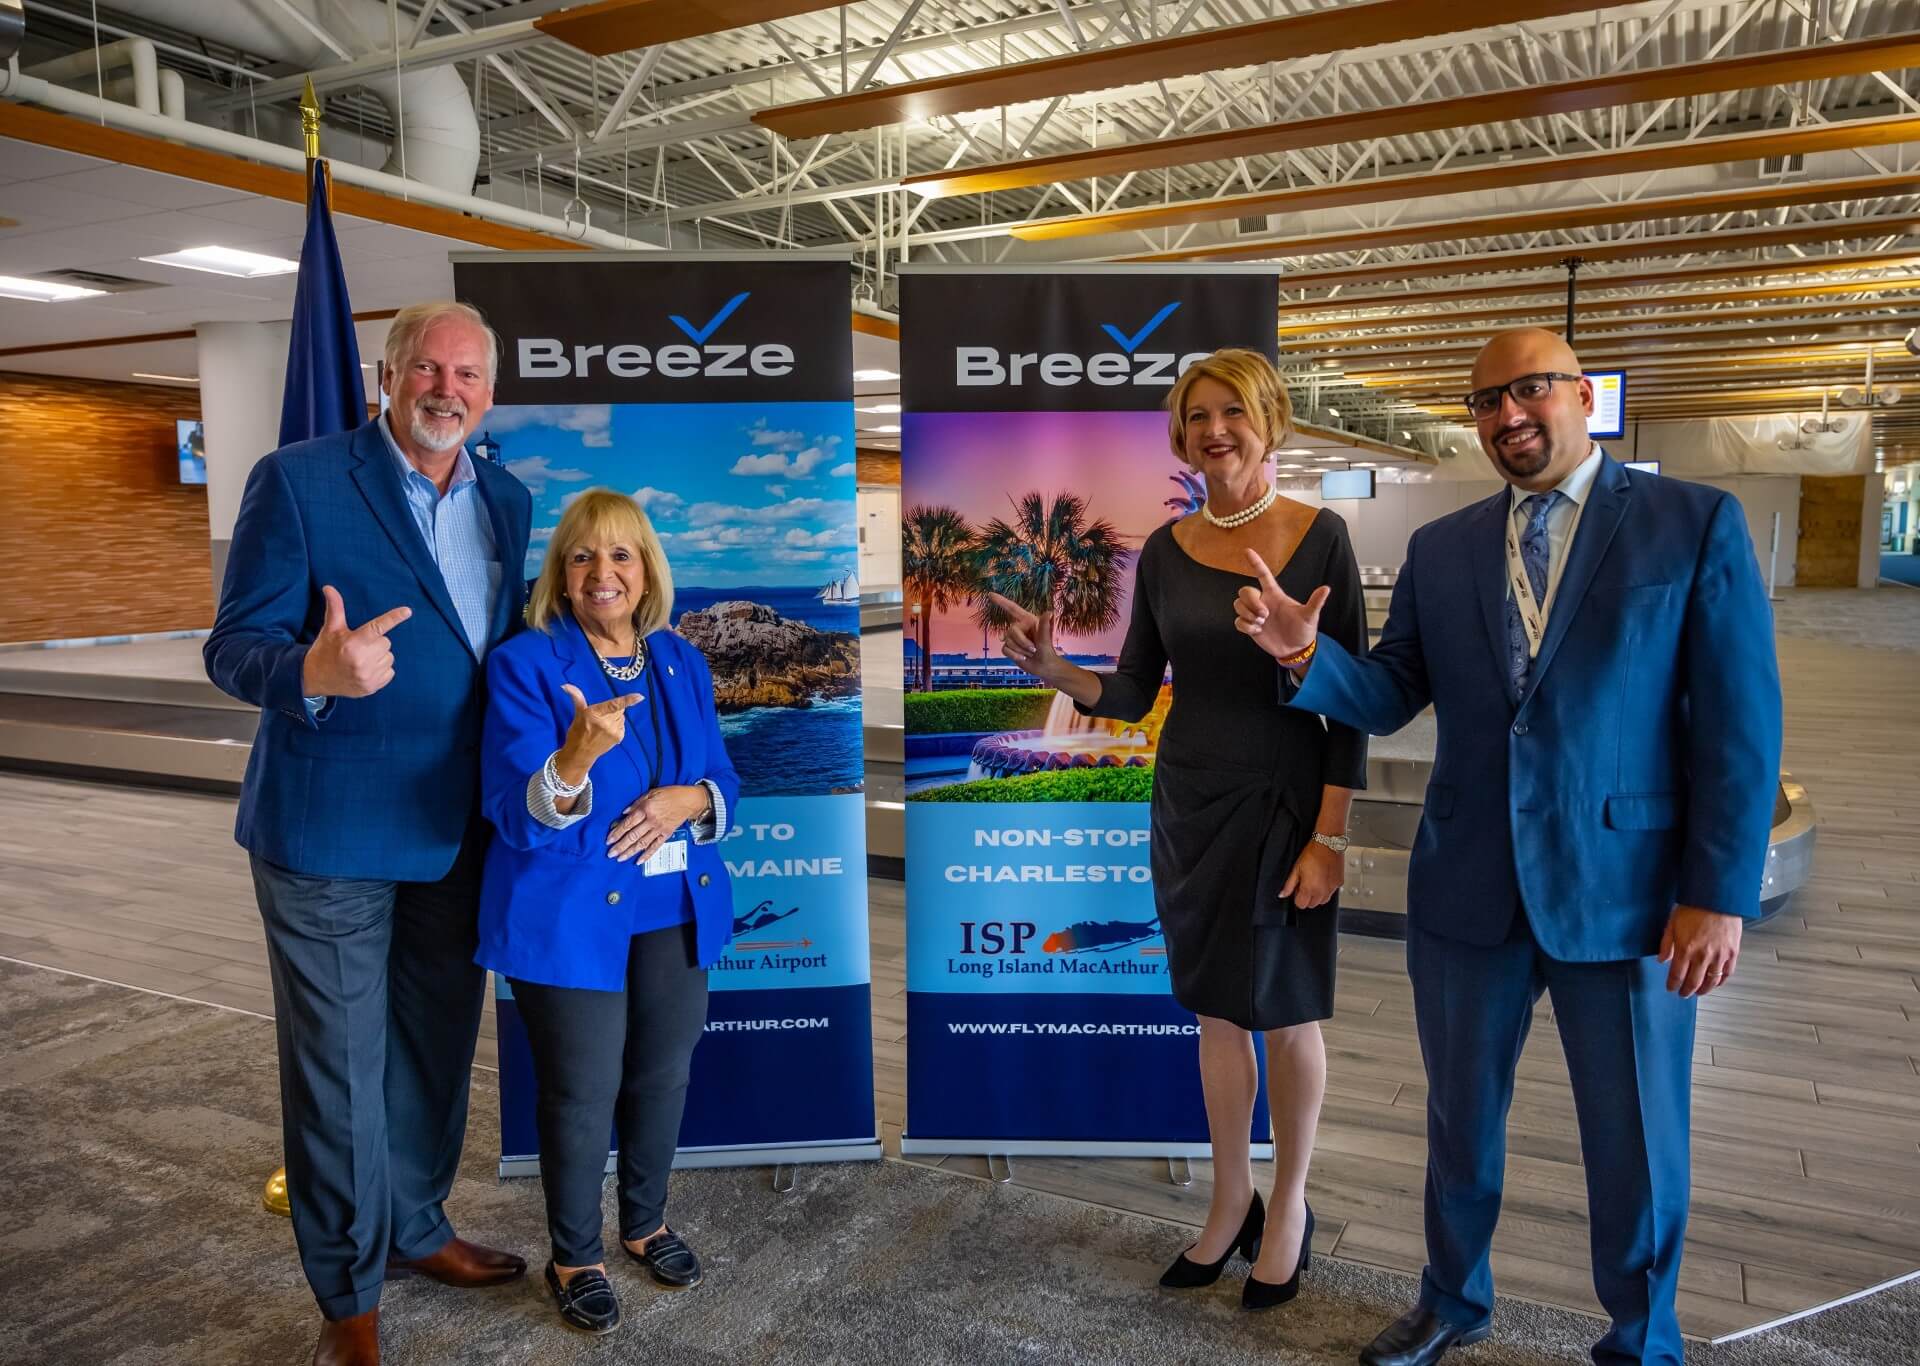 Group picture of ISP Staff in front of Breeze signs to celebrate new nonstop flights